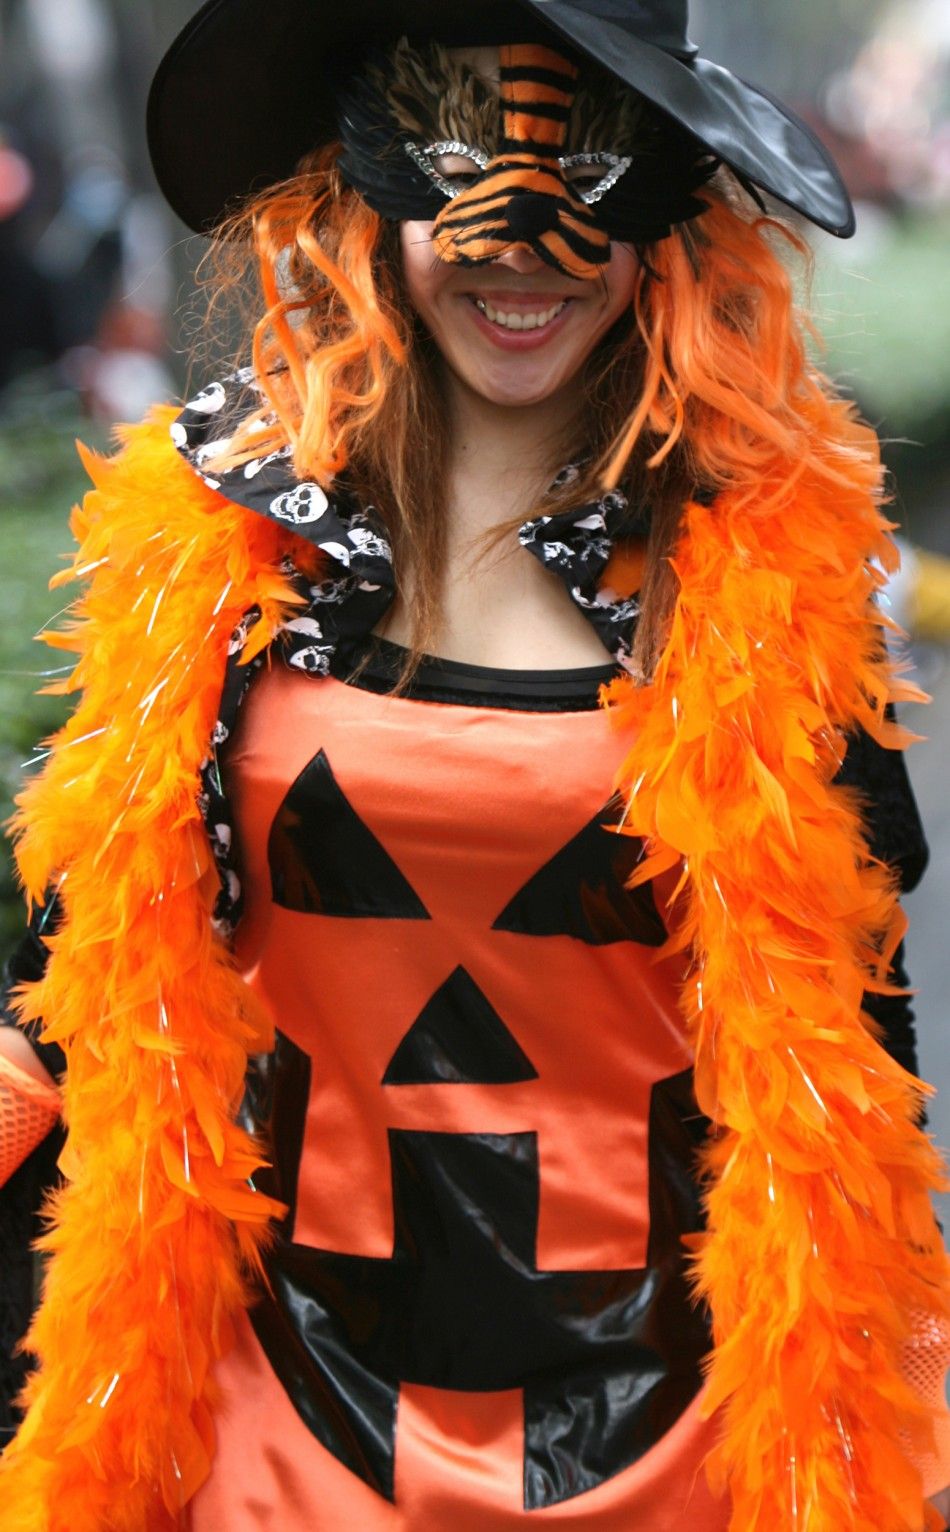 A woman dressed in a Halloween costume takes part in a parade in Tokyos Harajuku Omotesando district October 29, 2006. 